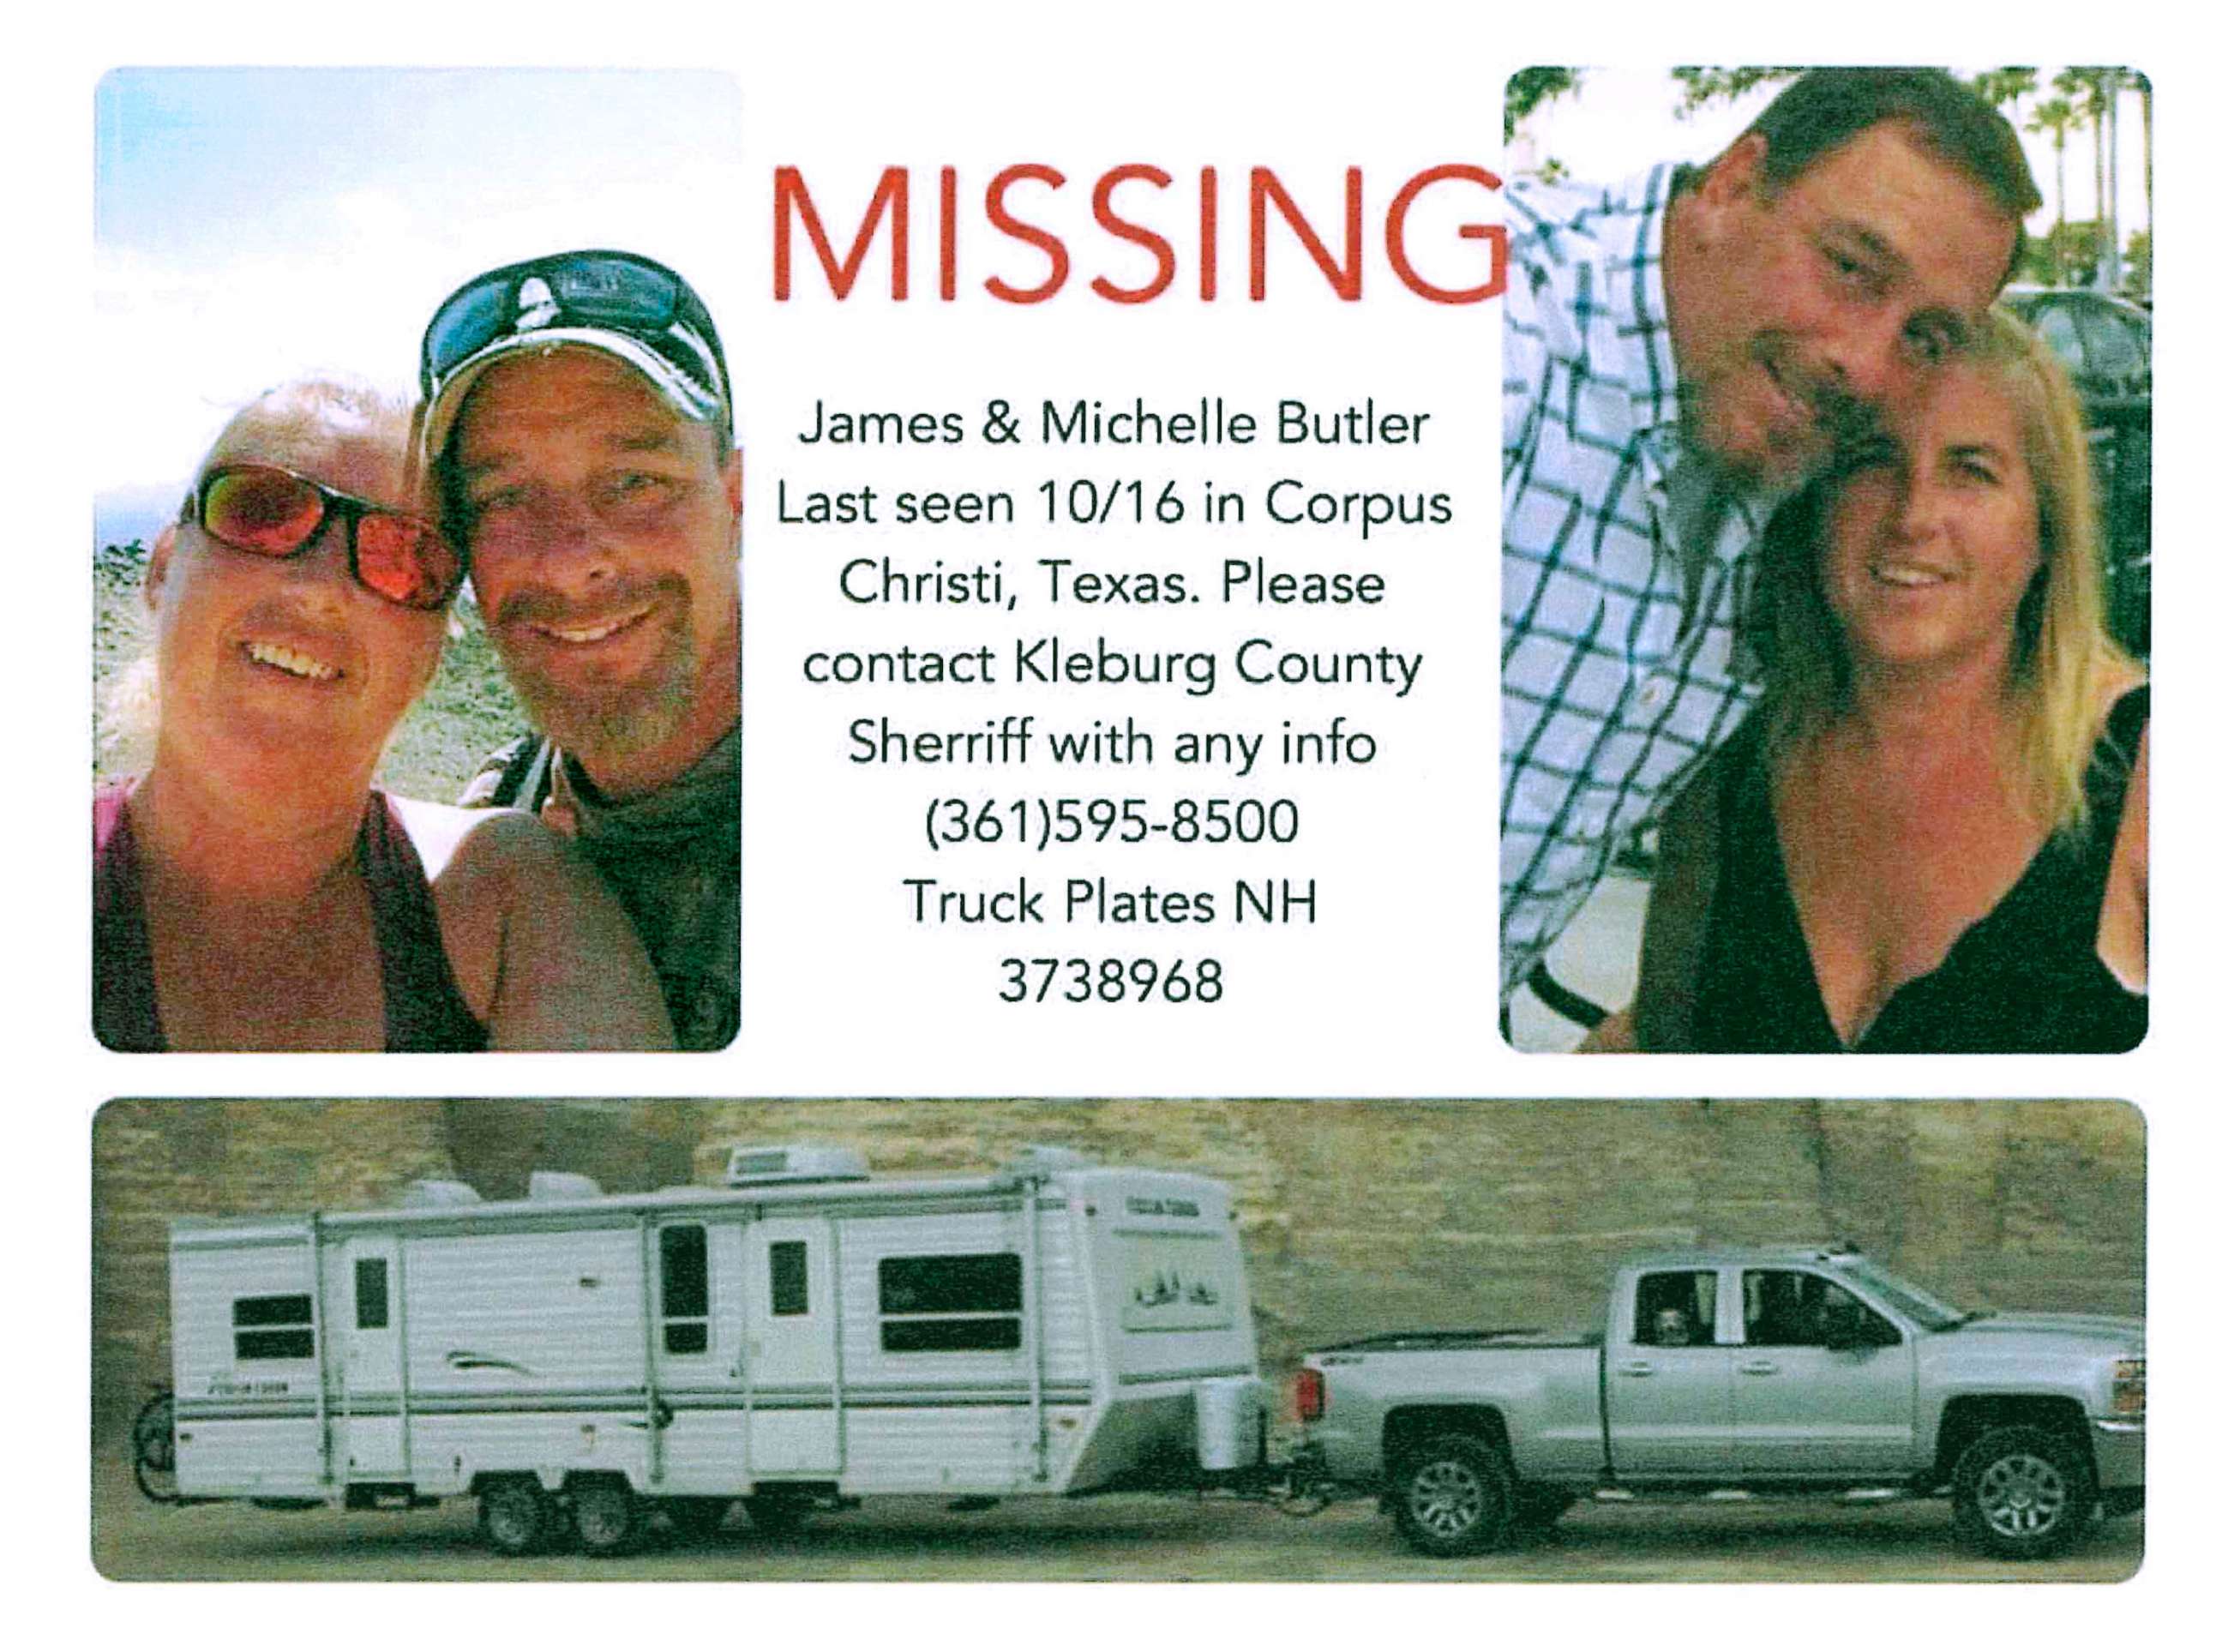 PHOTO: This poster released by the Kleberg County Sheriff's Office in Kingsville, Texas, shows James and Michelle Butler, of Rumney, N.H.